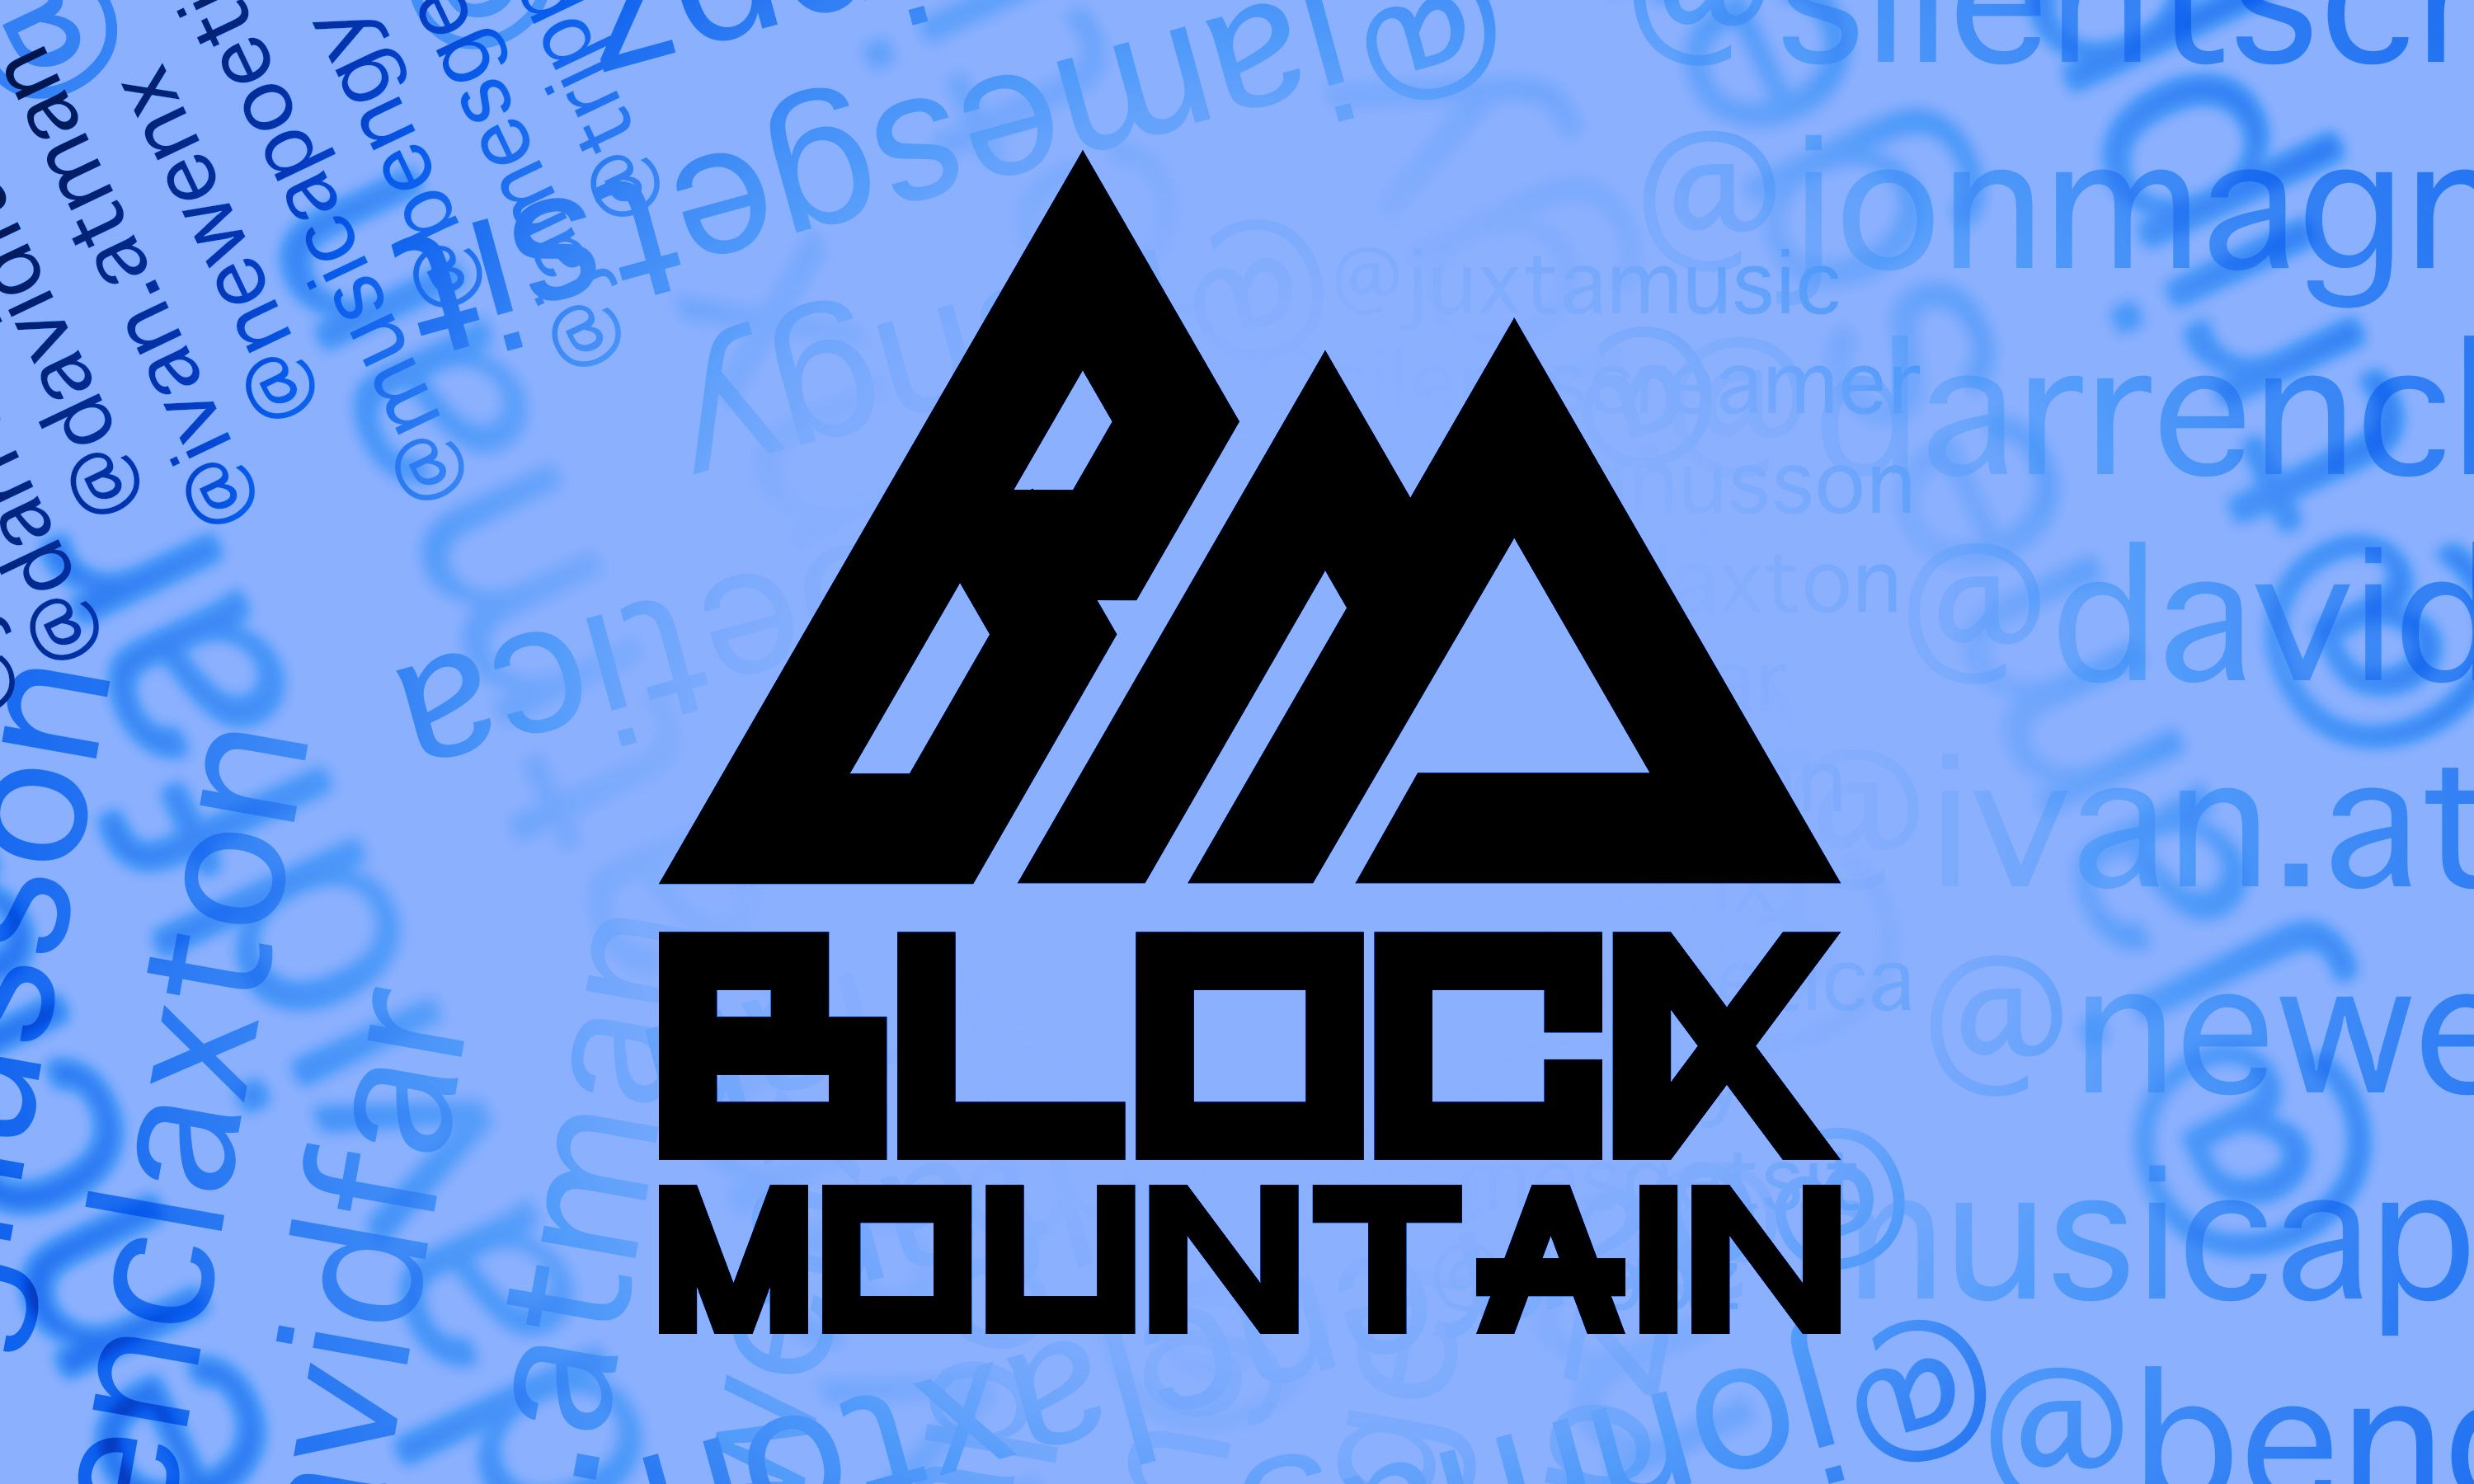 Block Mountain Background for Phase 1 copy.jpg